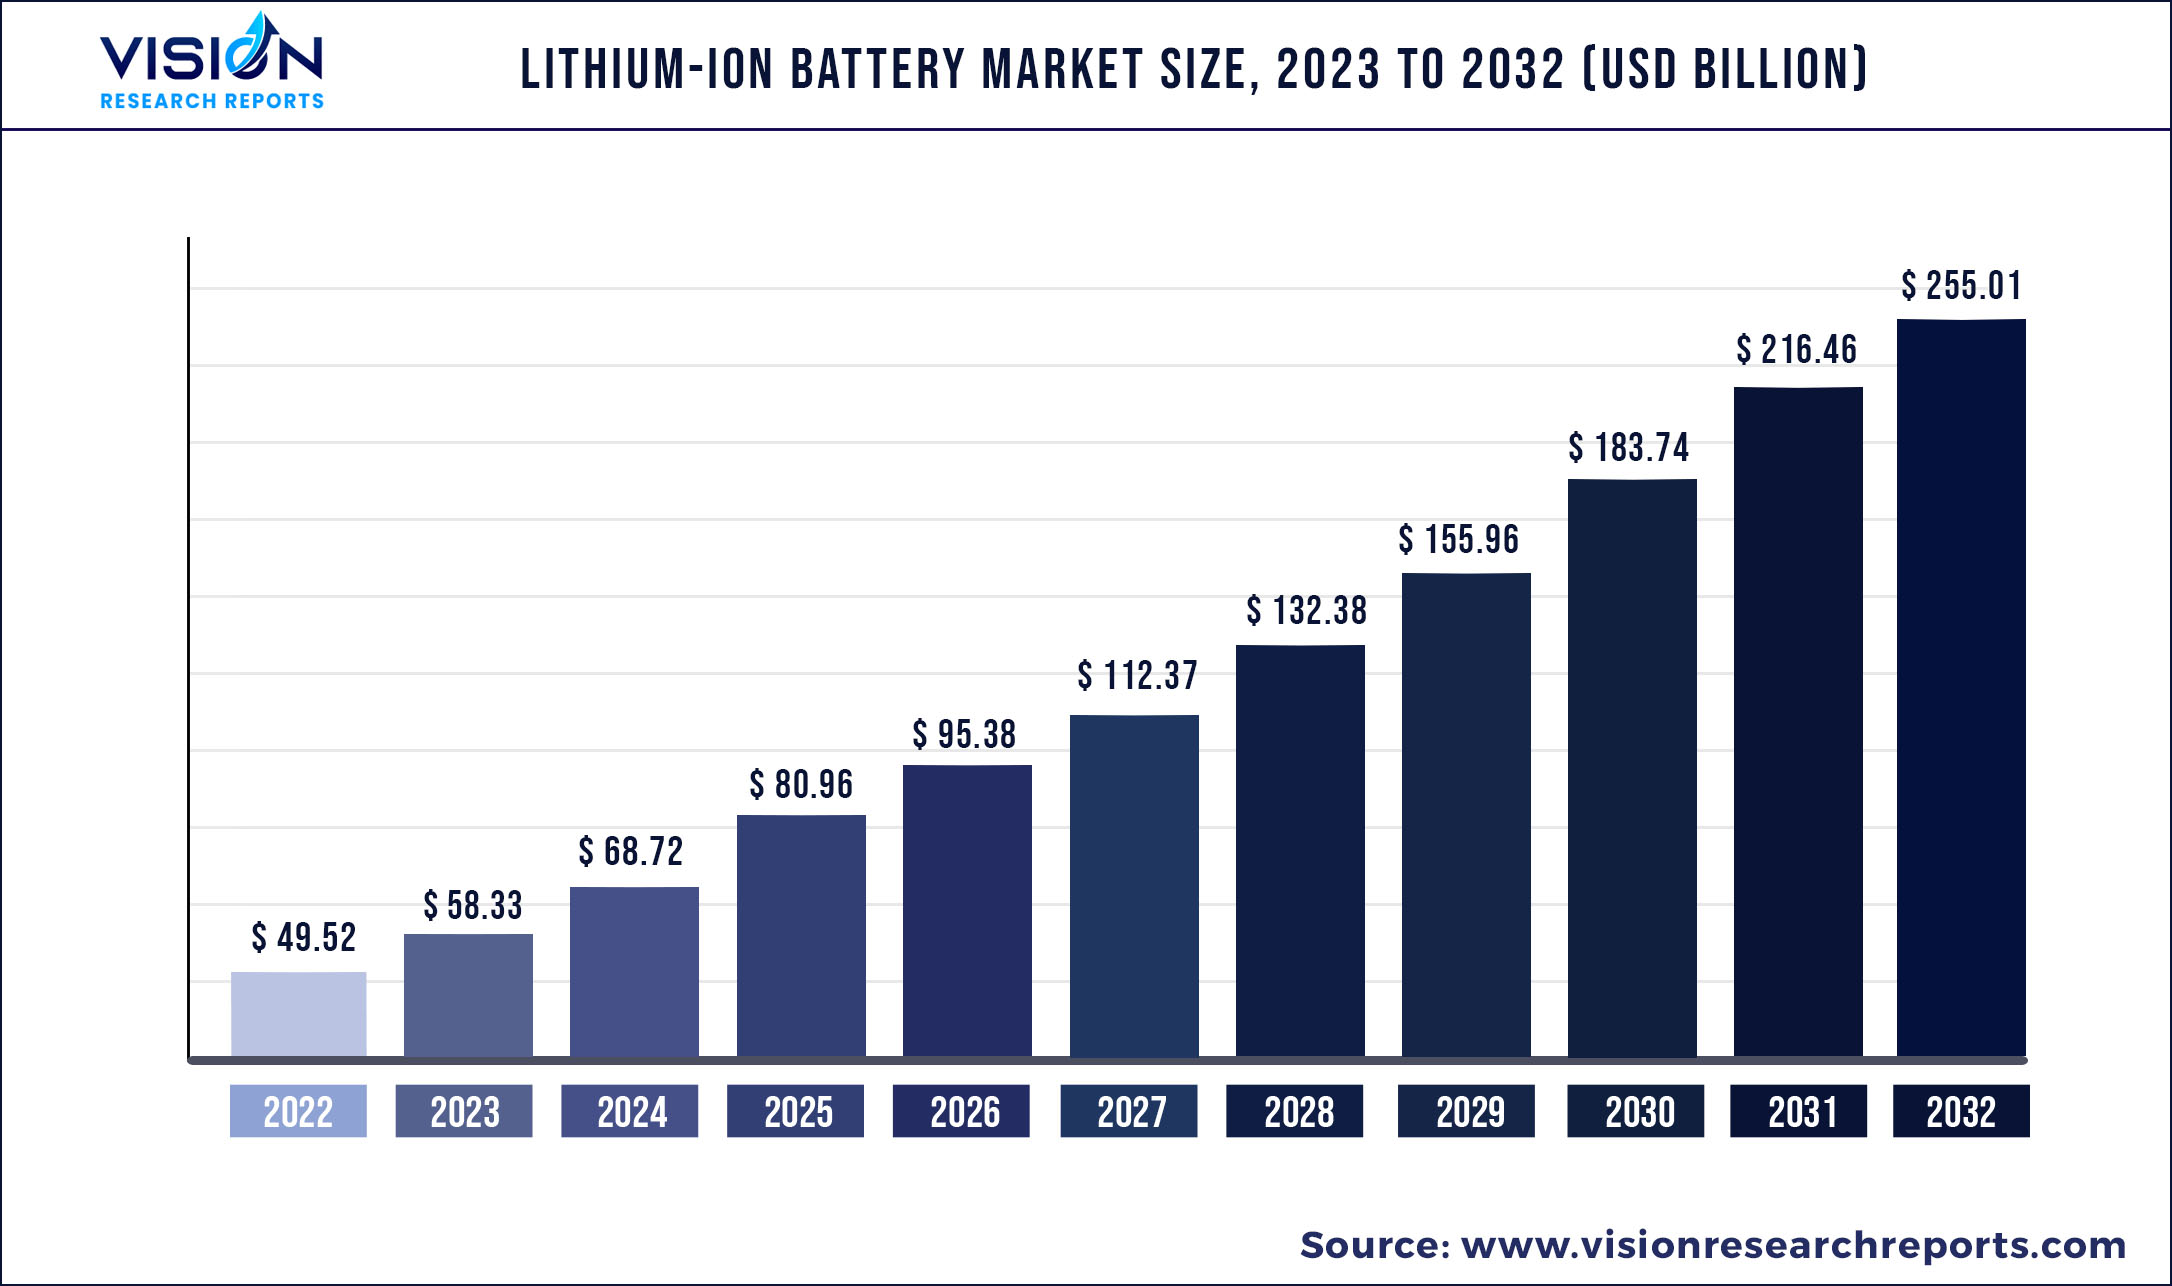 Lithium-ion Battery Market Size 2023 to 2032